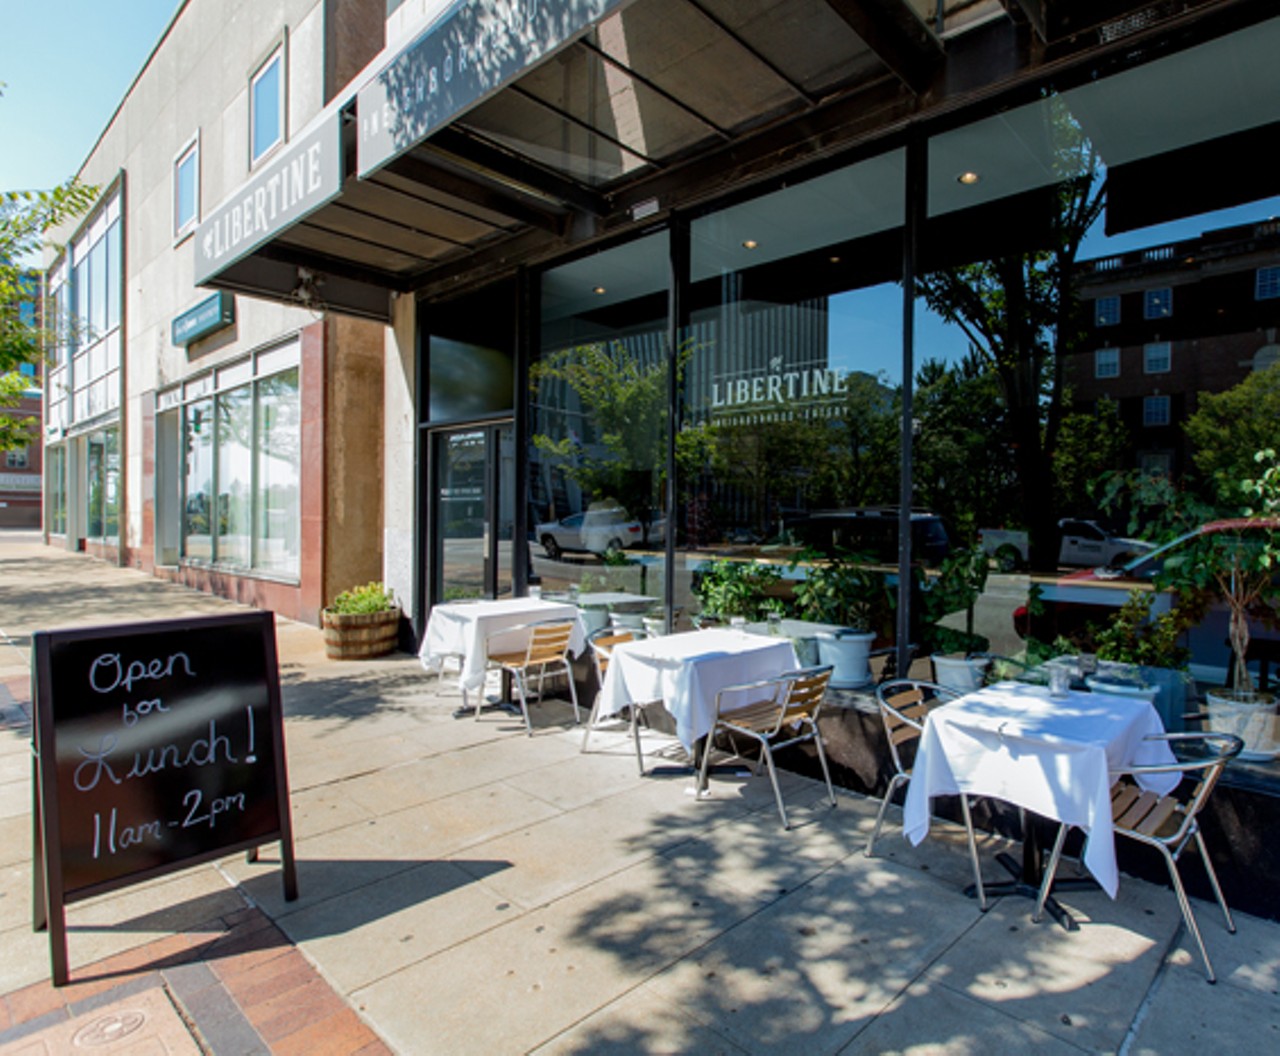 Patio dining in front of the Libertine in Clayton.